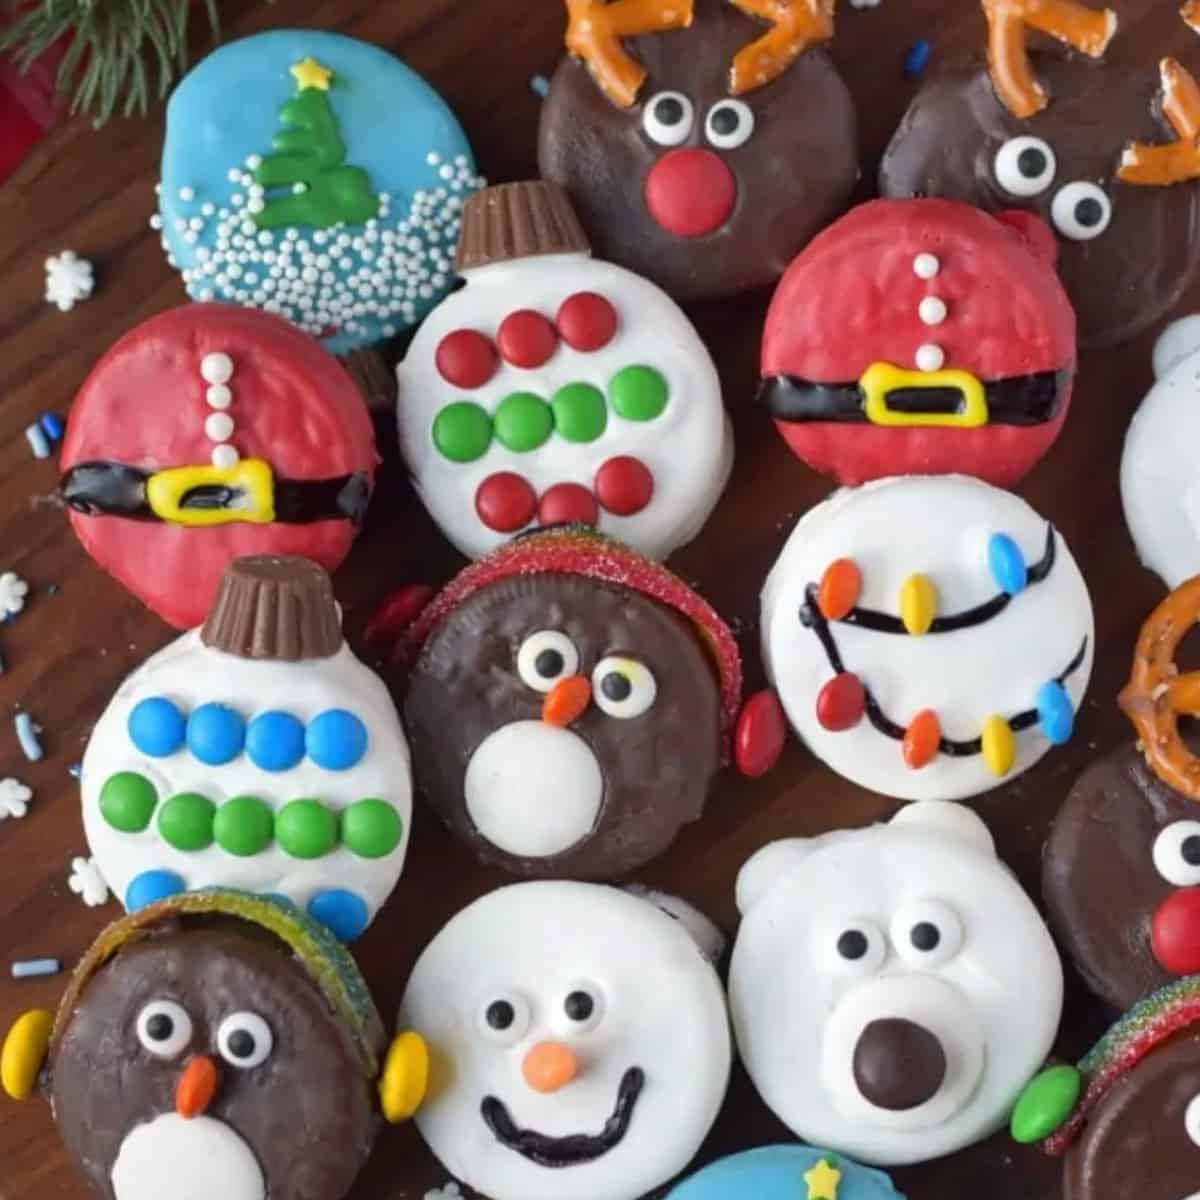 A bunch of oreo-dipped Christmas cookies.